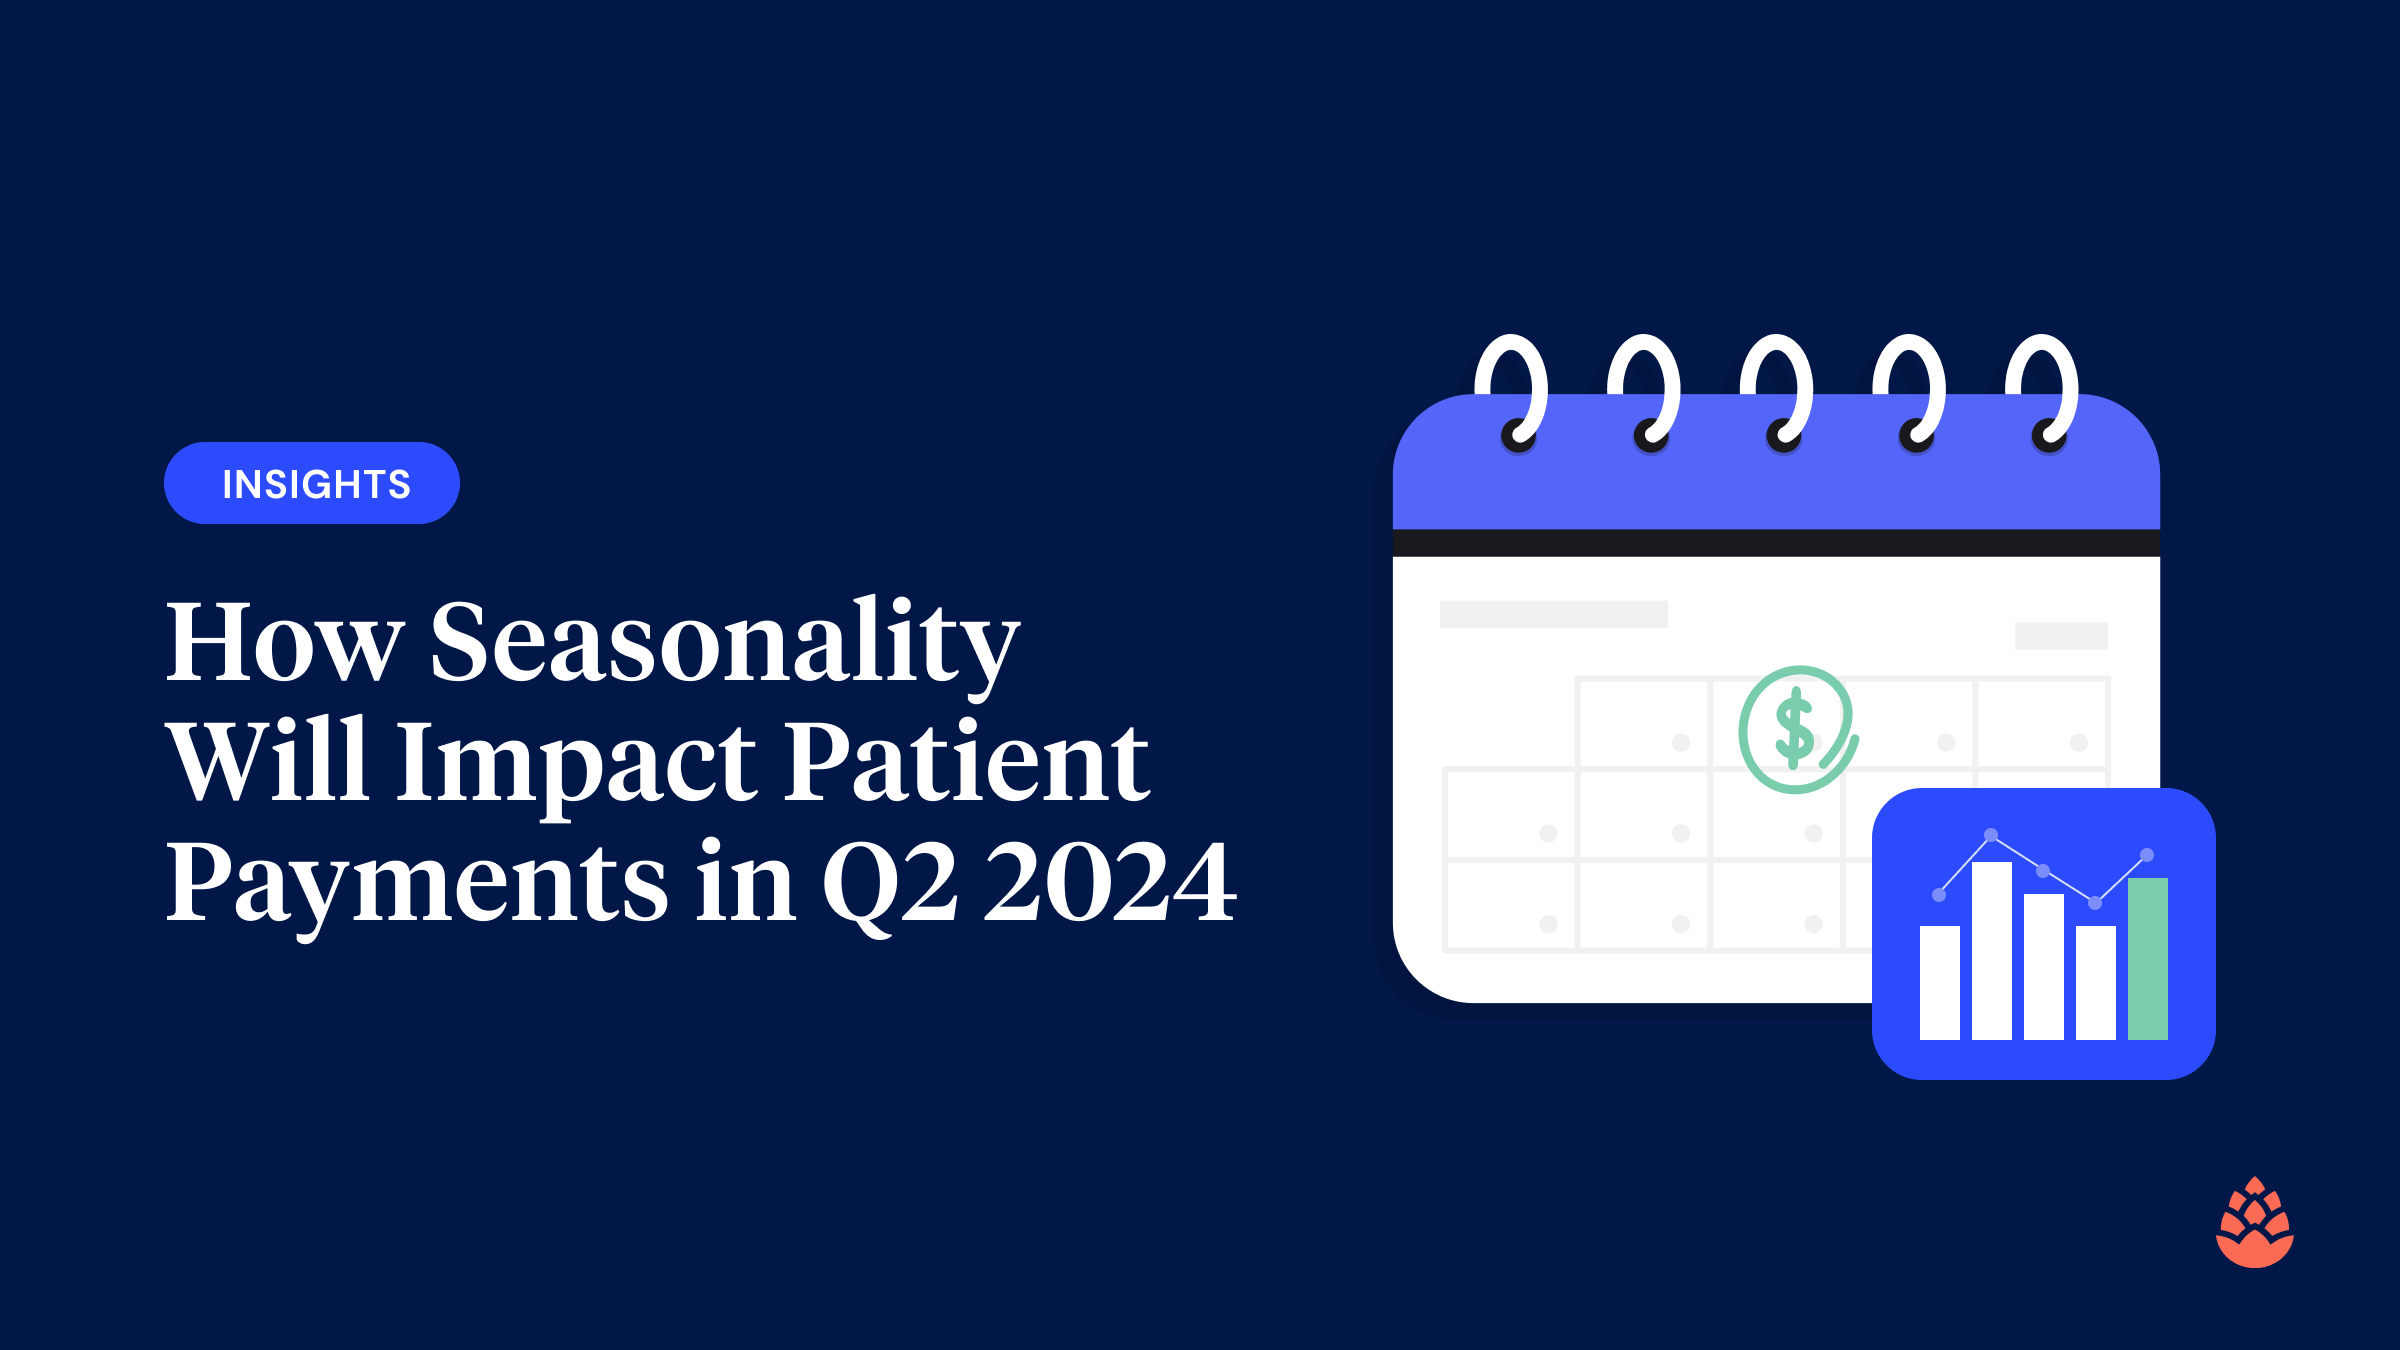 Patient Payment Seasonality in Q2 2024